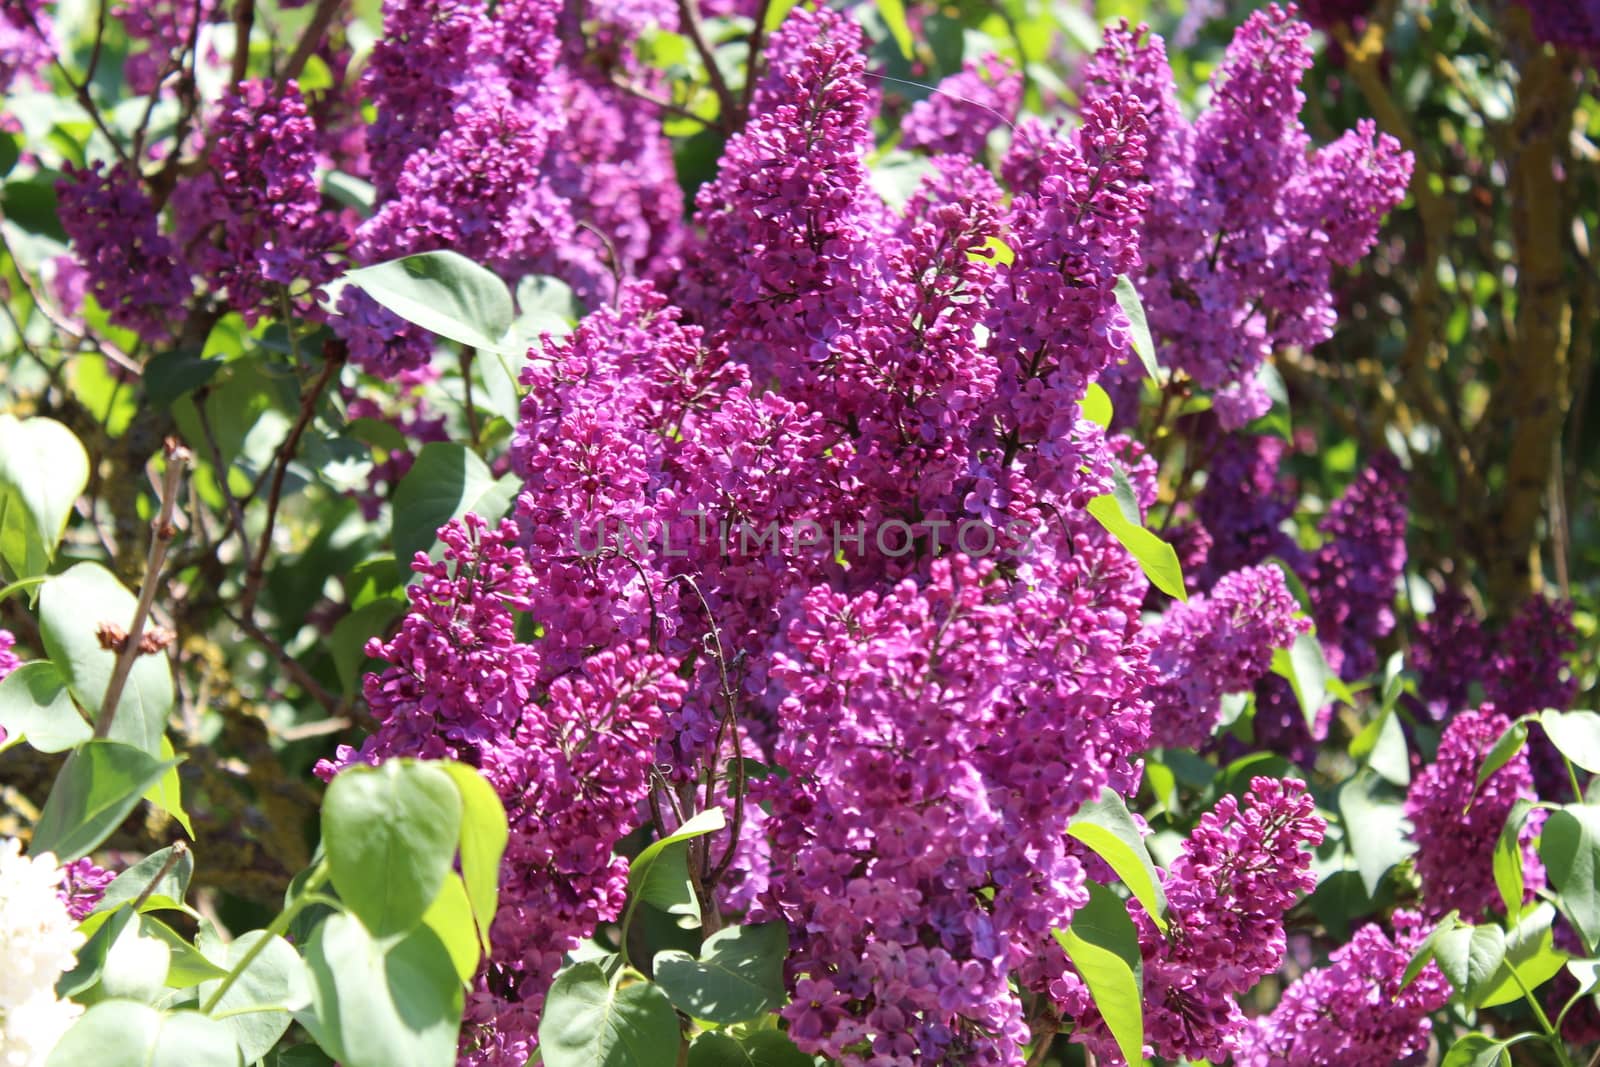 The picture shows beautiful lilac in the garden.